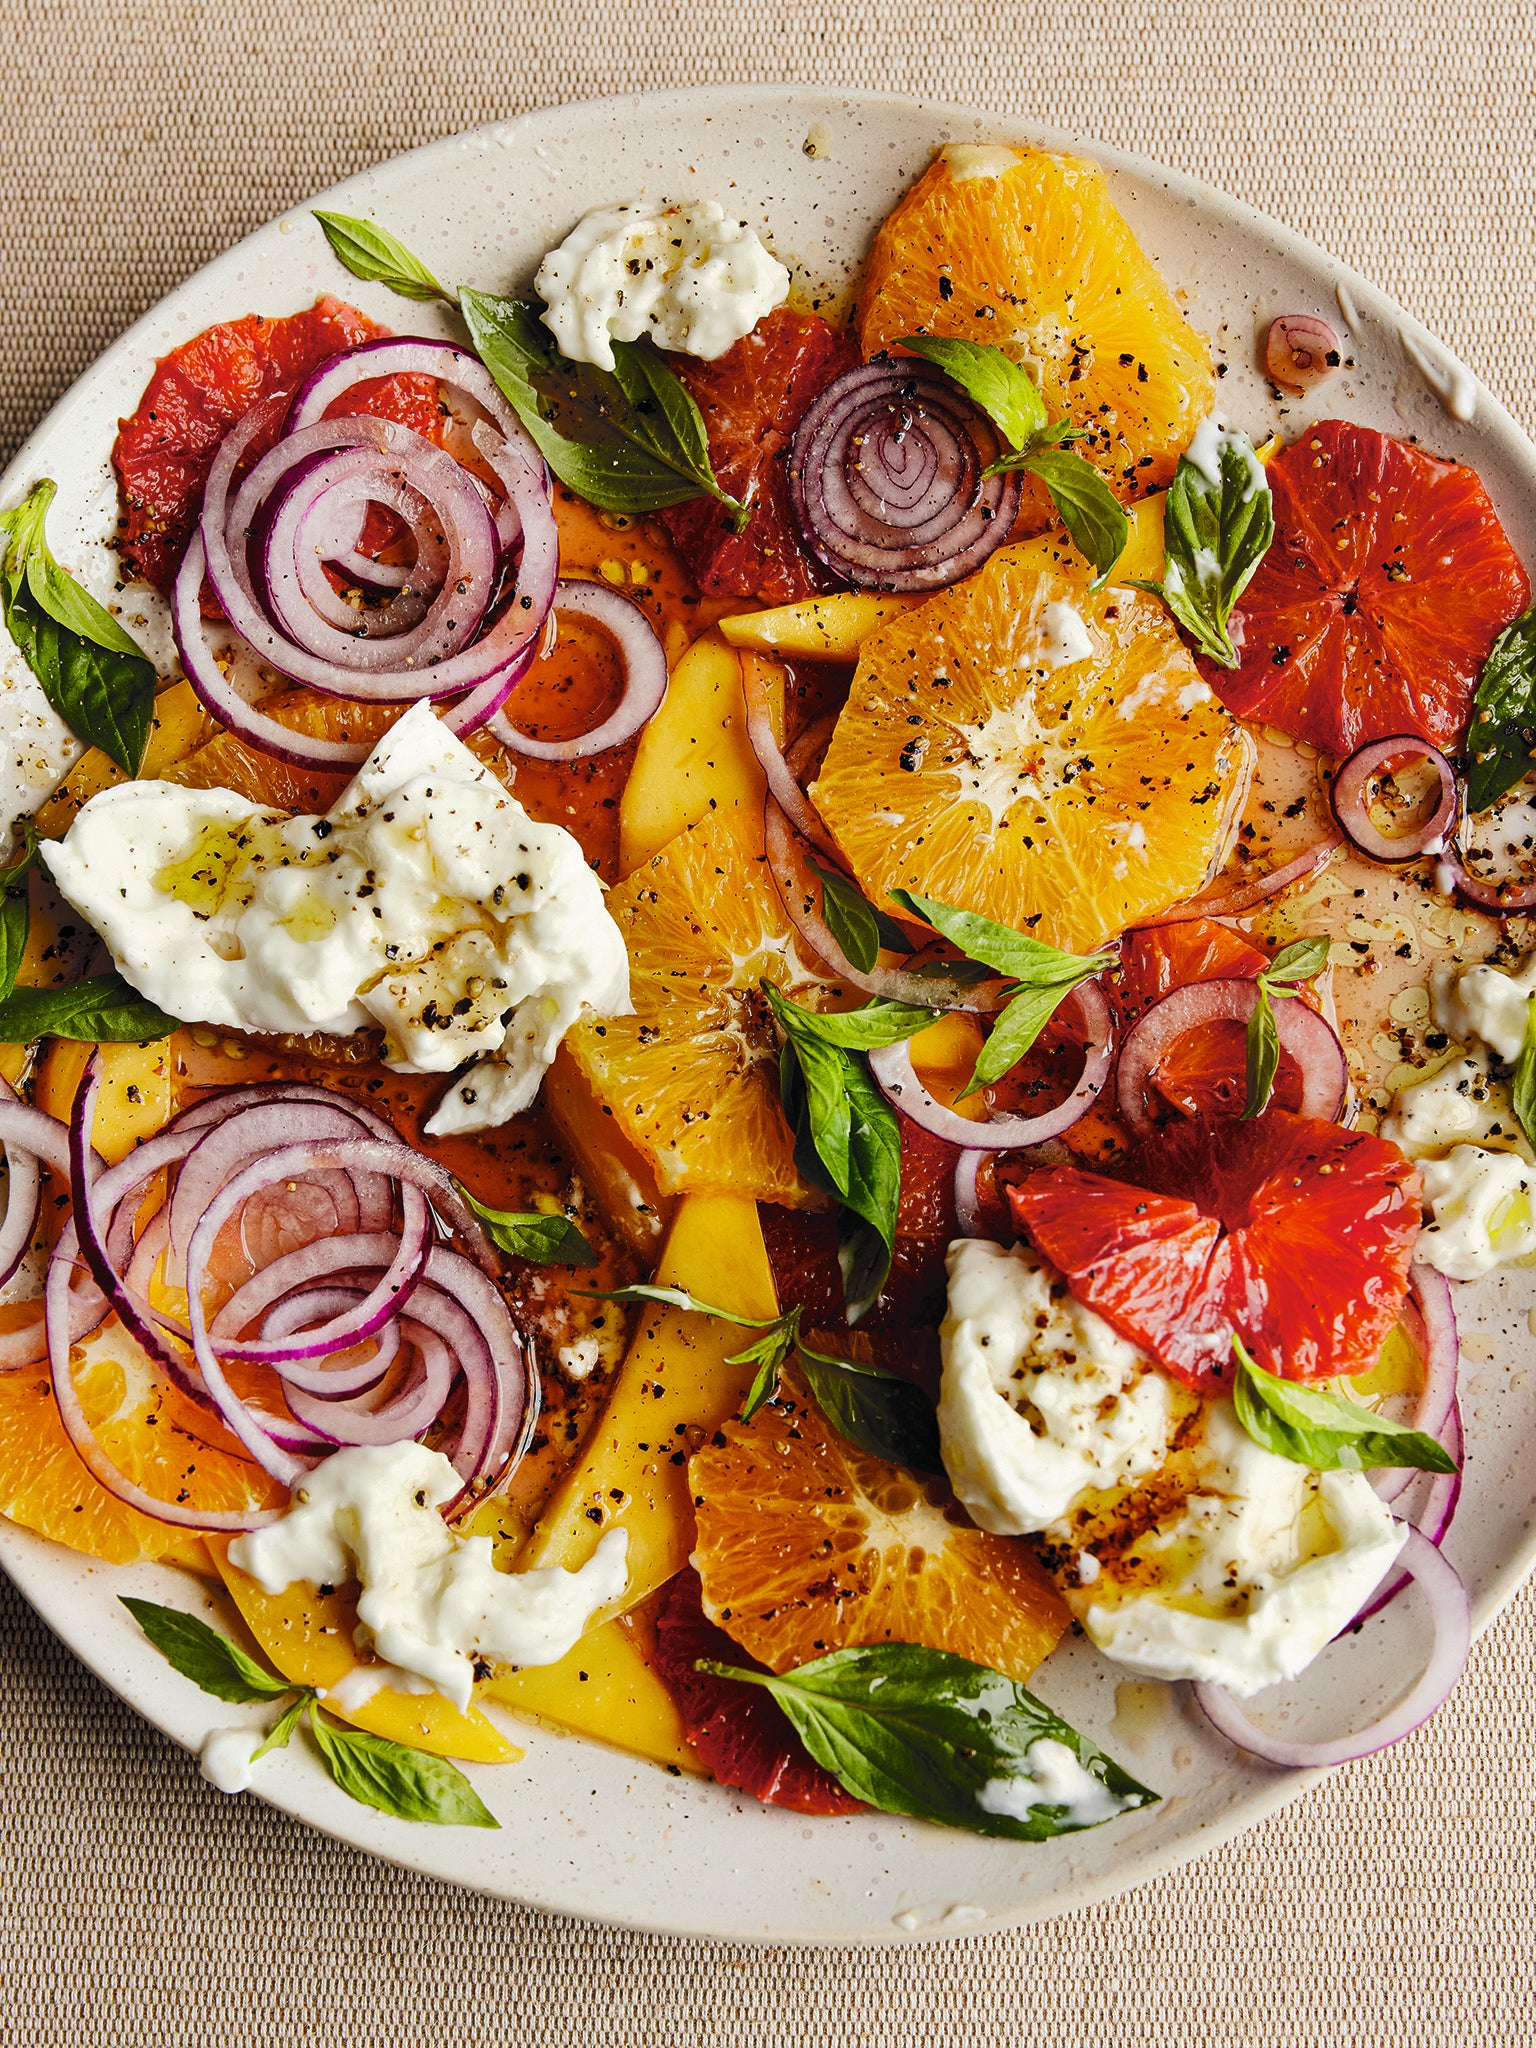 When blood oranges are in season, this is how to use them